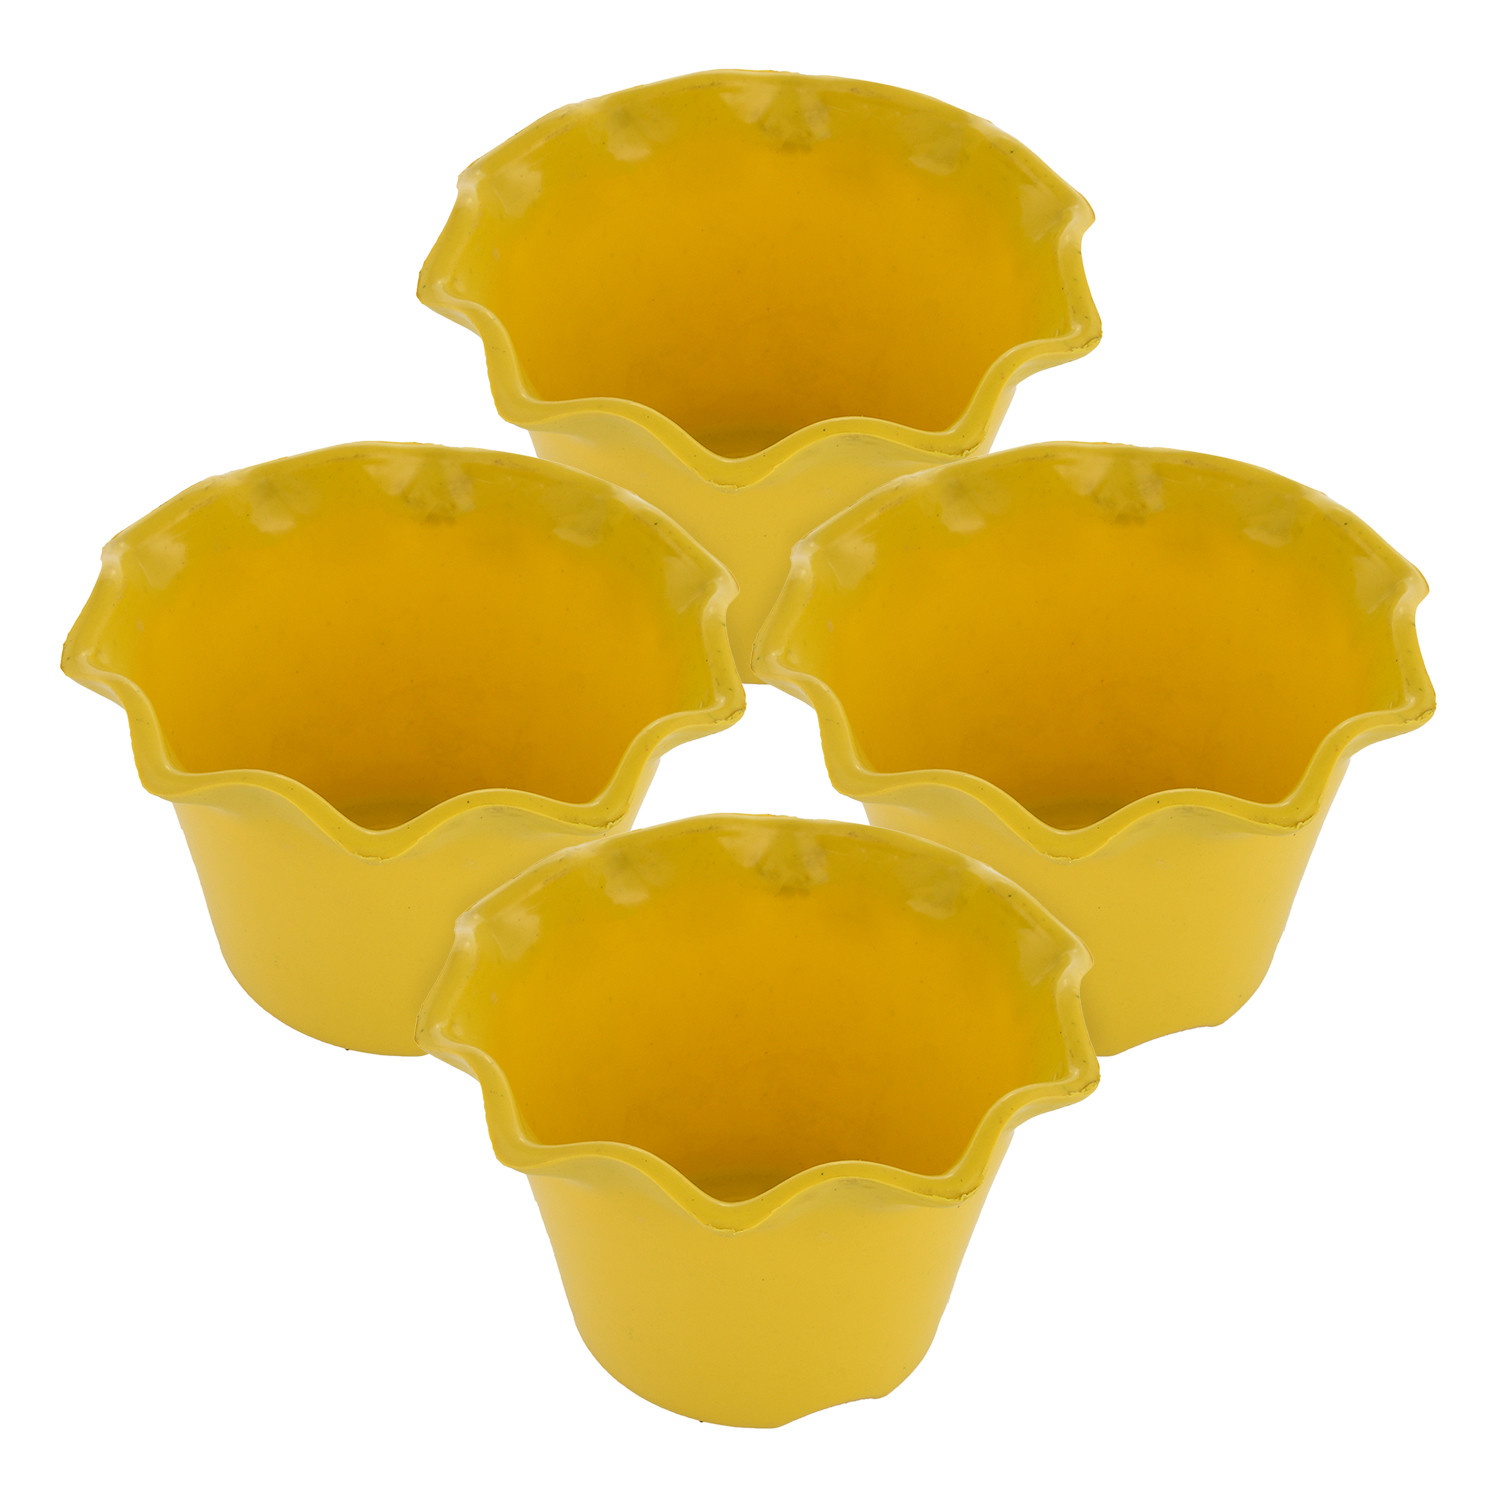 Kuber Industries Blossom Flower Pot|Durable Plastic Flower Pot|Gamla With Drain Holes for Home Décor|Balcony|Garden|8 Inch (Yellow)